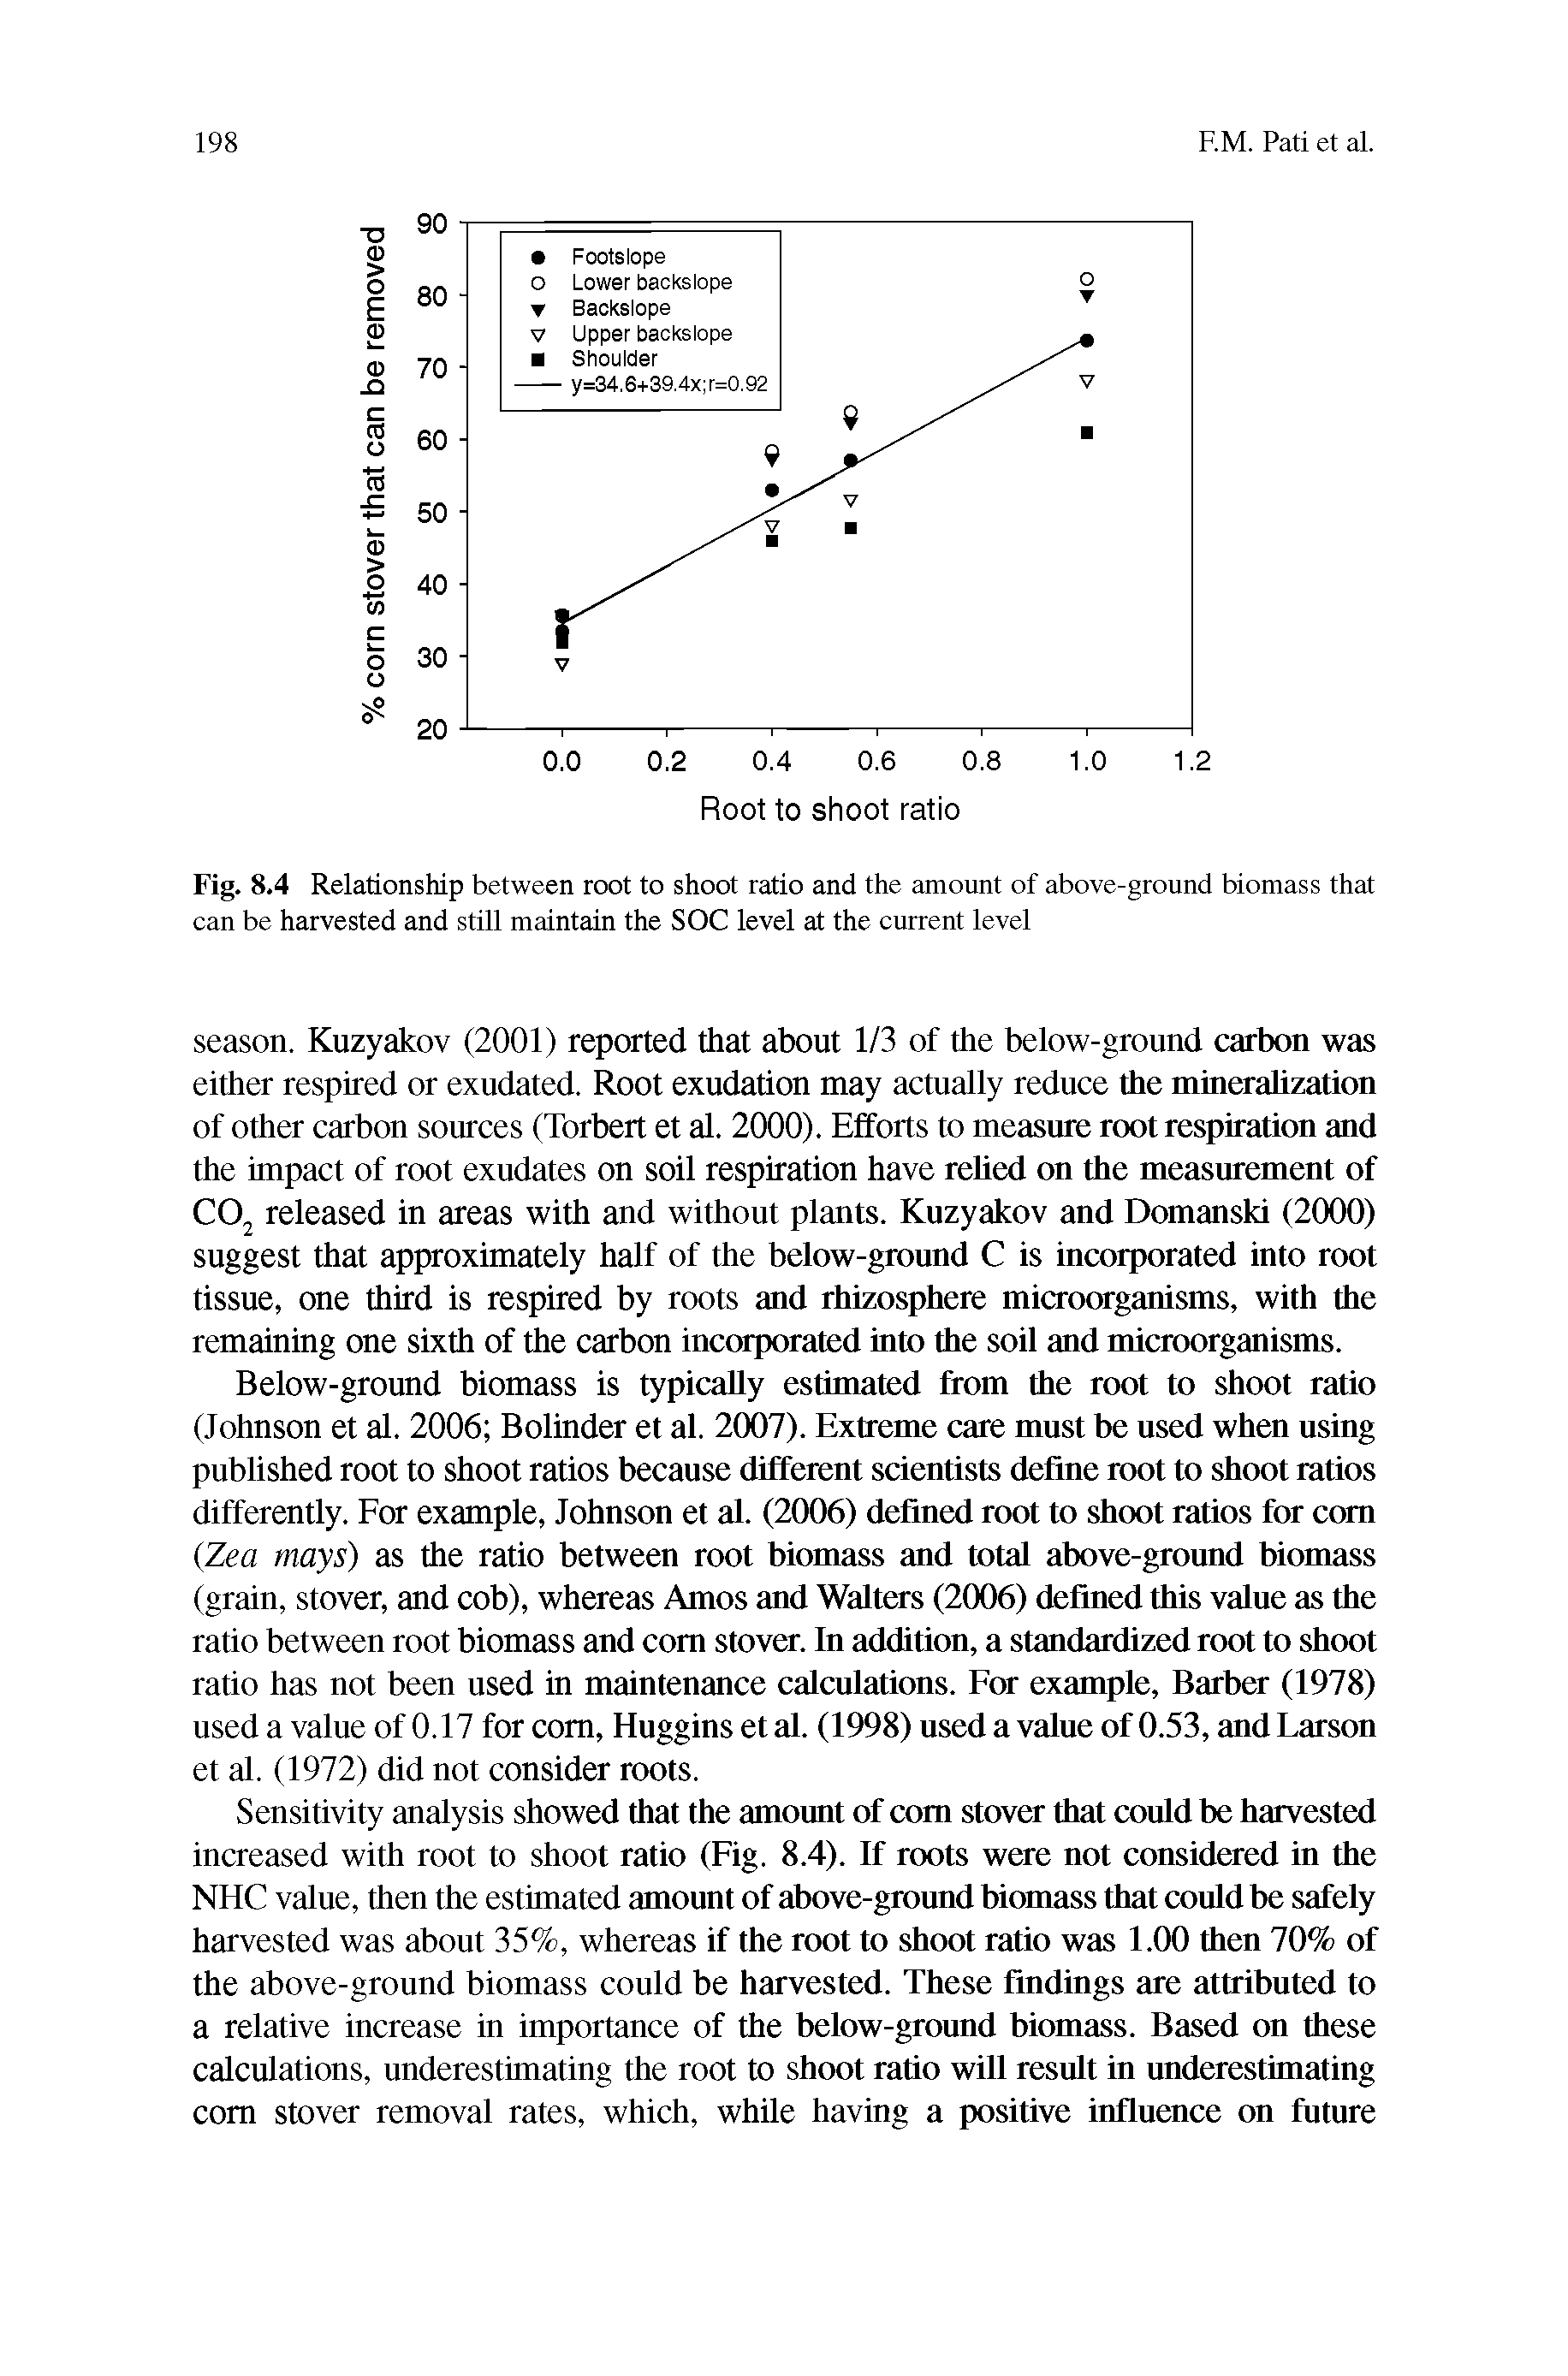 Fig. 8.4 Relationship between root to shoot ratio and the amount of above-ground biomass that can be harvested and still maintain the SOC level at the current level...